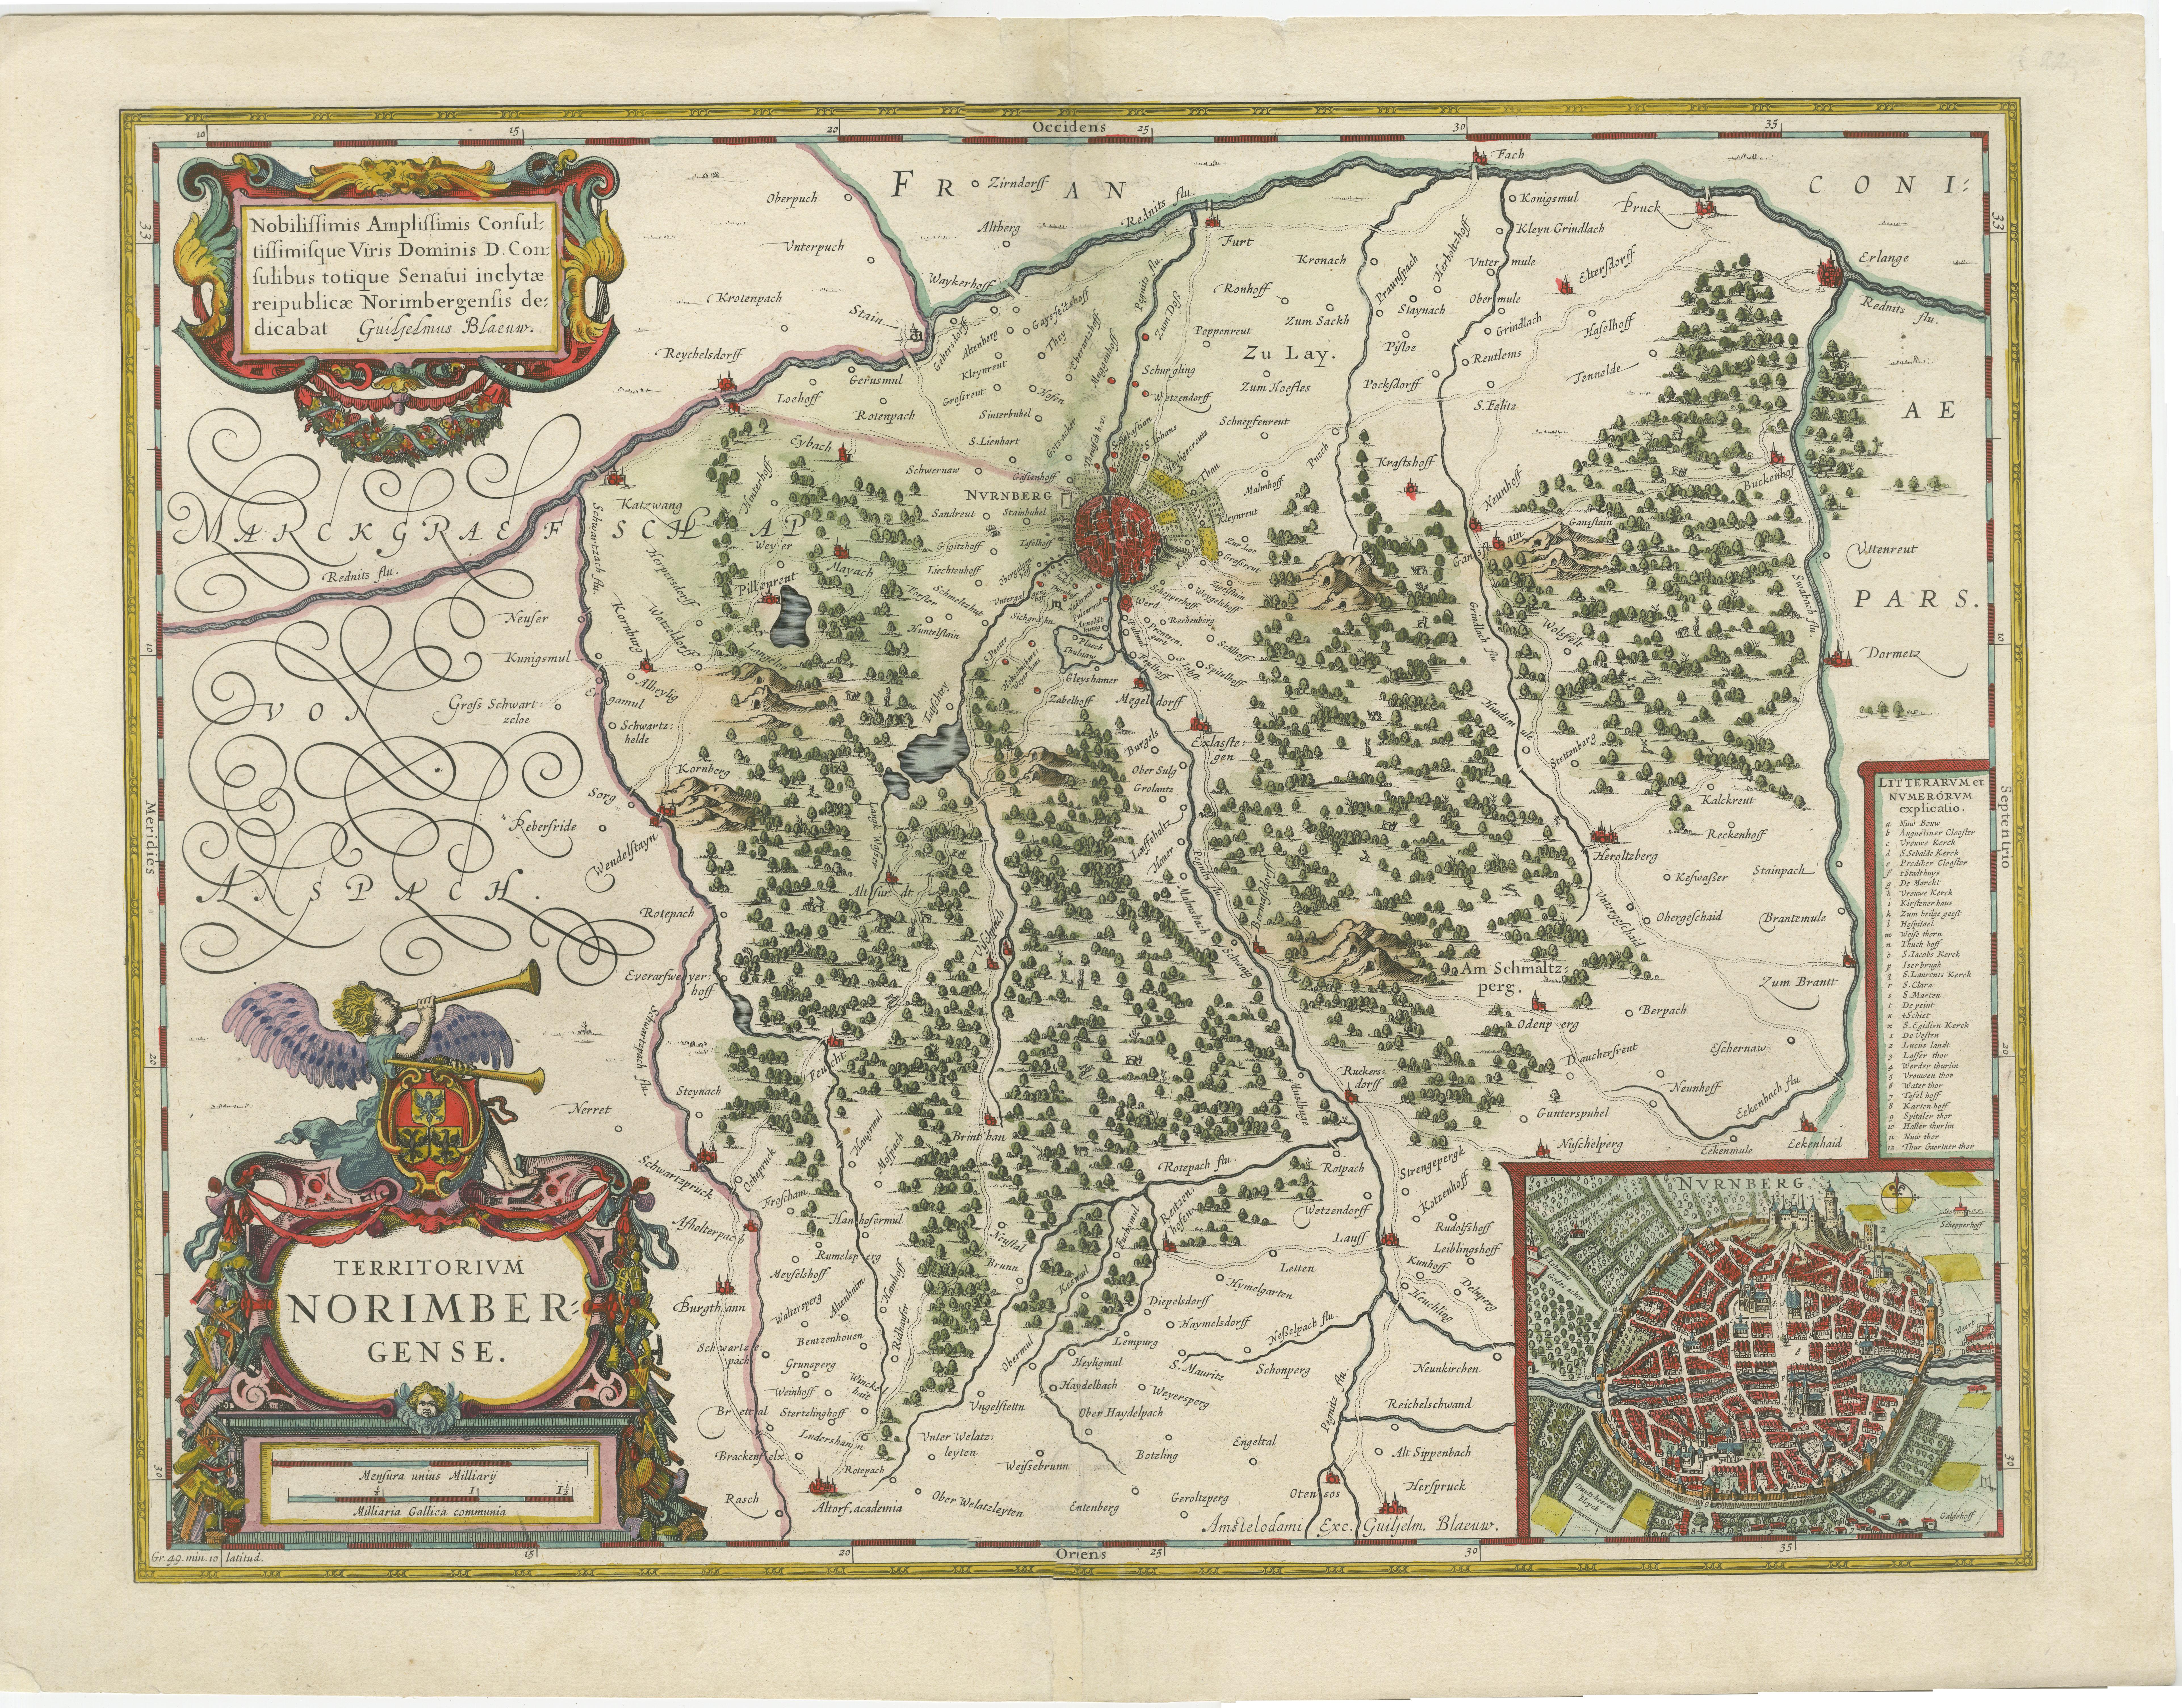 Antique map titled 'Territorium Norimbergense'. Beautiful map centered on Nuremberg, Germany. With decorative title cartouche and inset plan of the city. Published by W. Blaeu, circa 1635. 

Willem Janszoon Blaeu (1571-1638) was a prominent Dutch